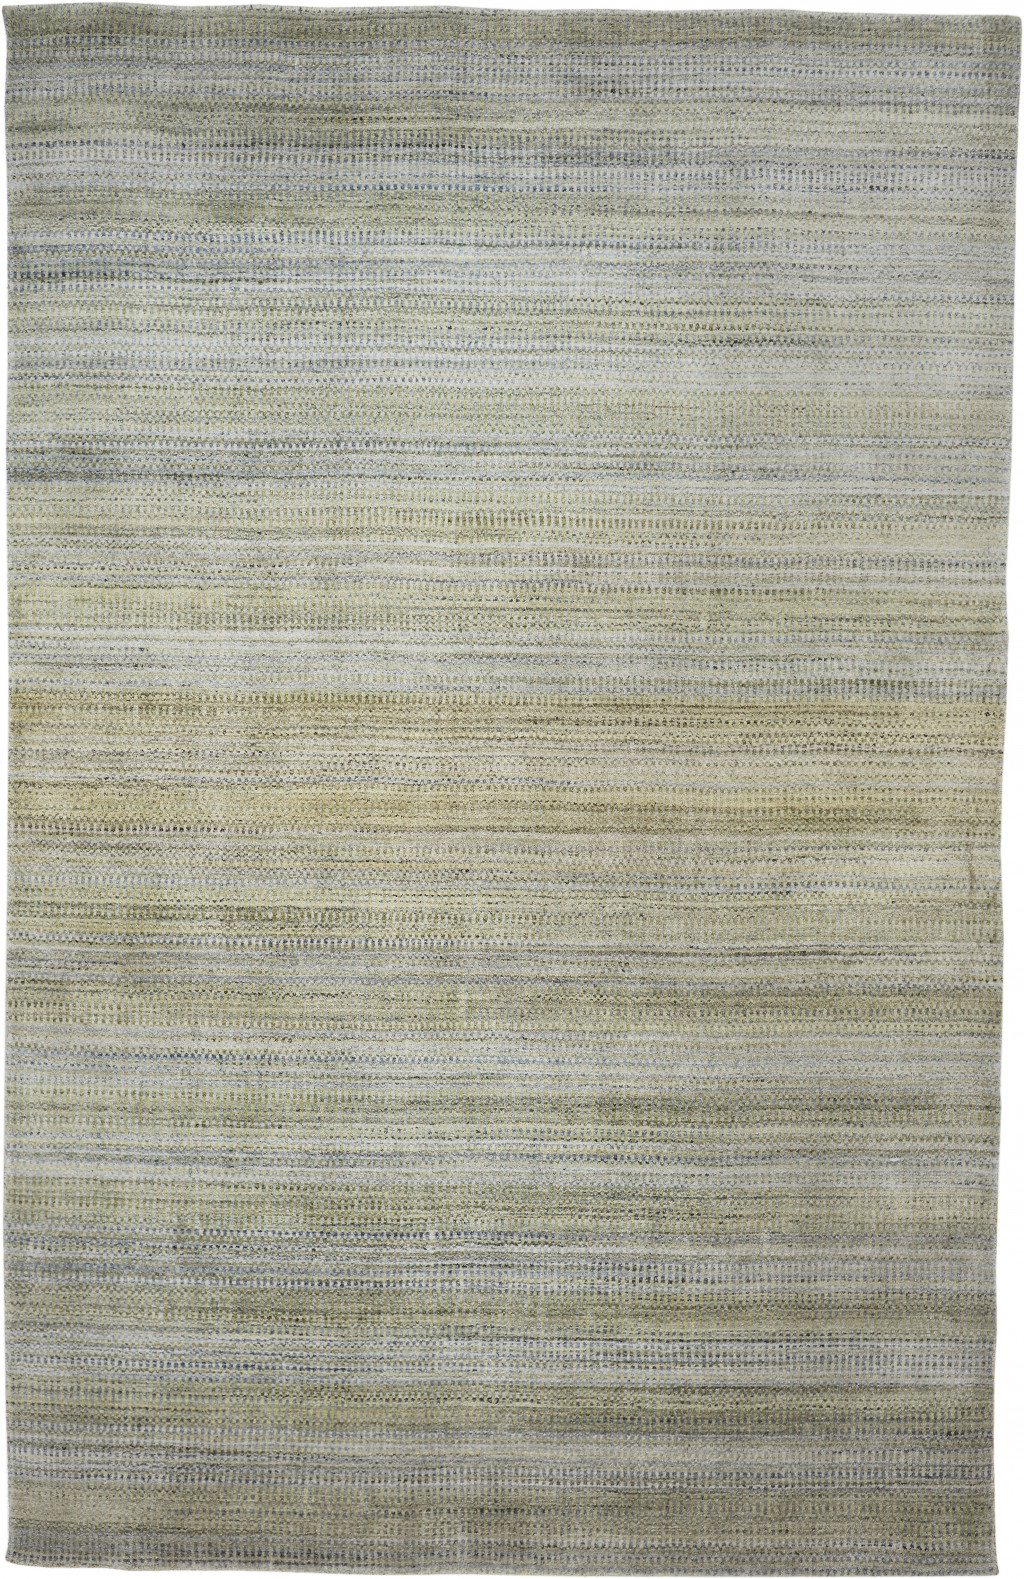 8' X 11' Green Blue And Tan Ombre Hand Woven Area Rug-511724-1